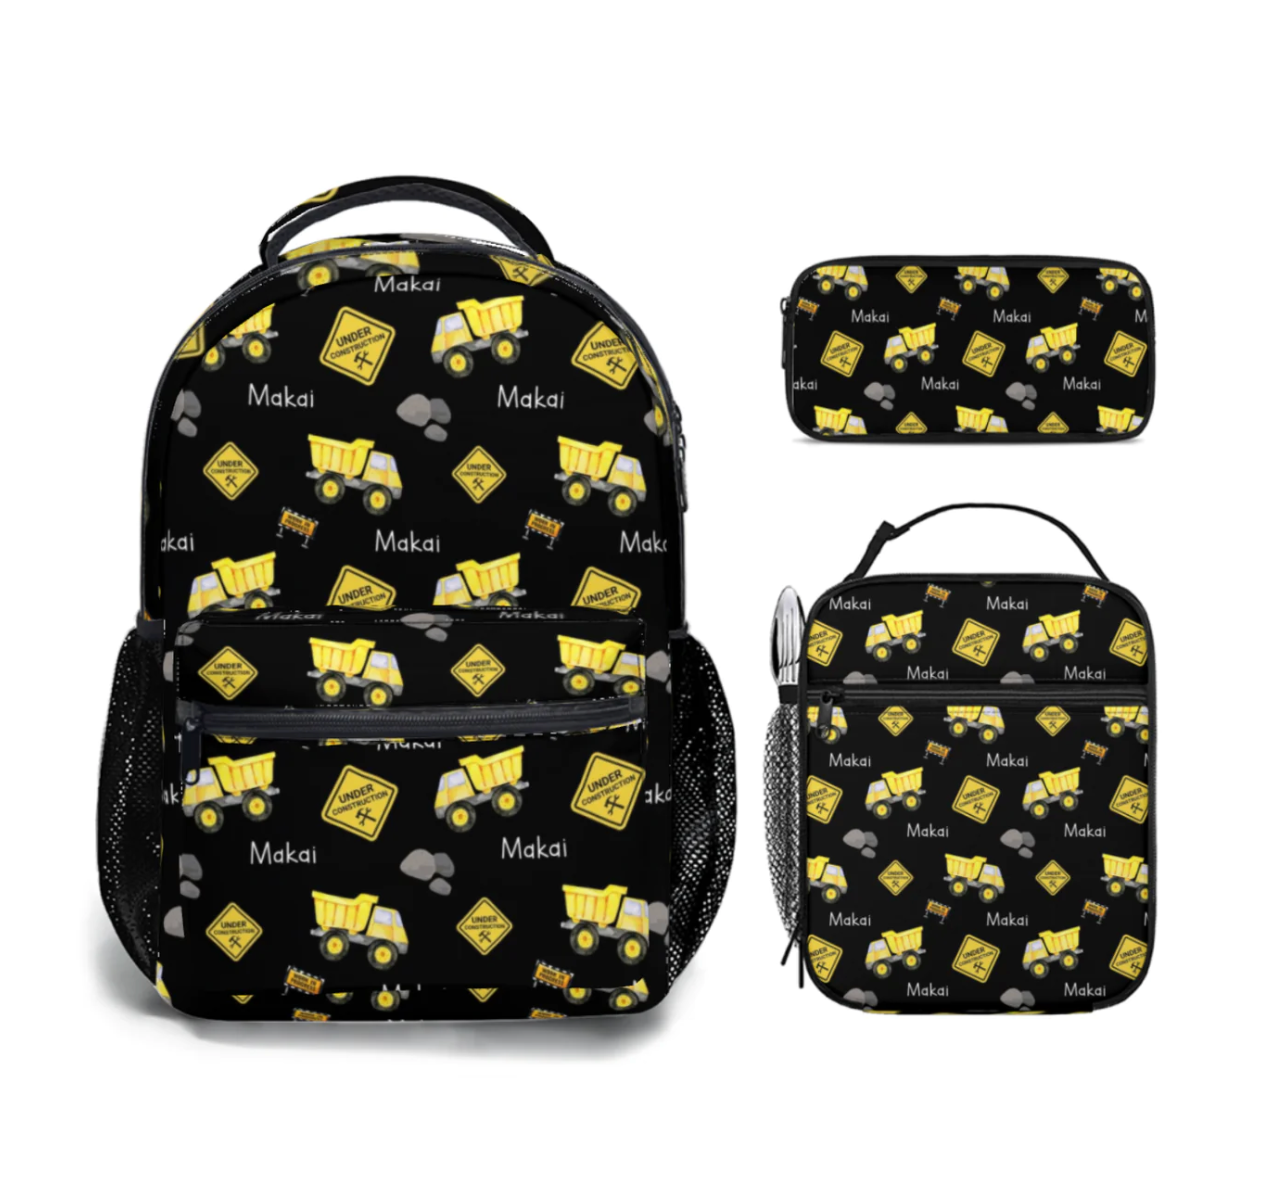 Introducing Our Exciting New Kids Bag Combos!